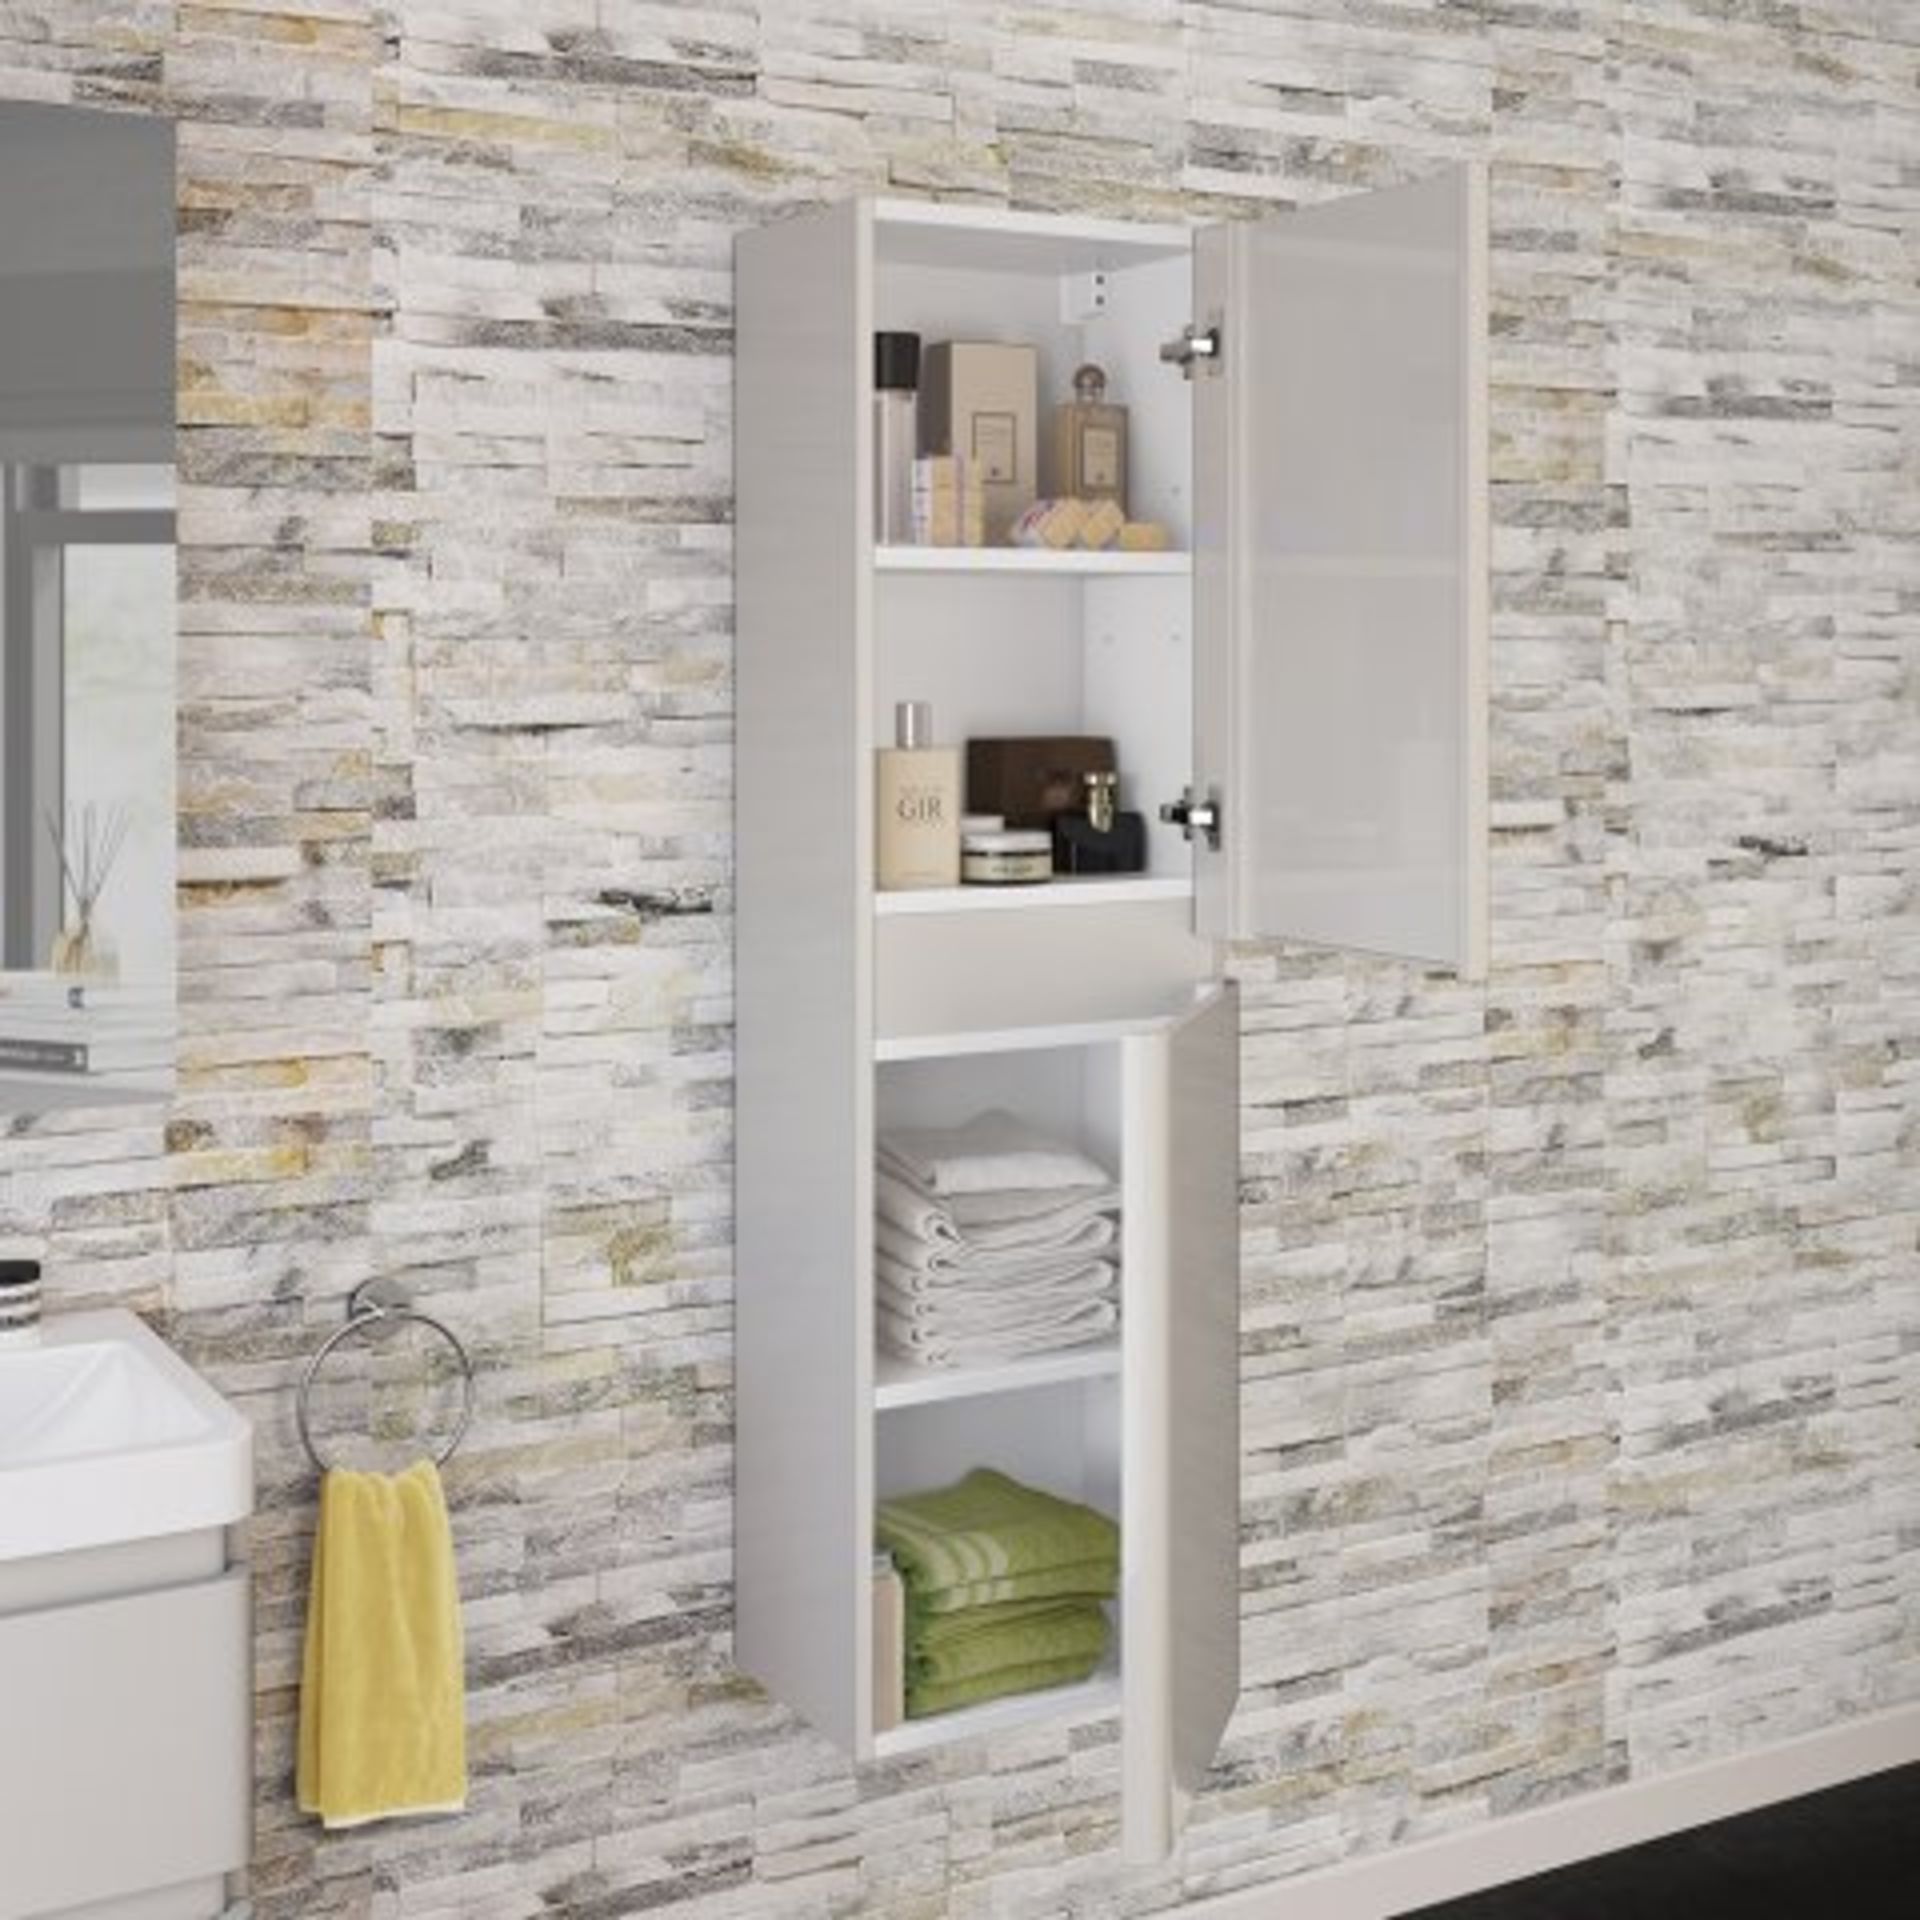 AA246- 1400mm Denver II Gloss Cashmere Tall Storage Cabinet - Wall Hung. RRP £299.99. With its - Image 2 of 3